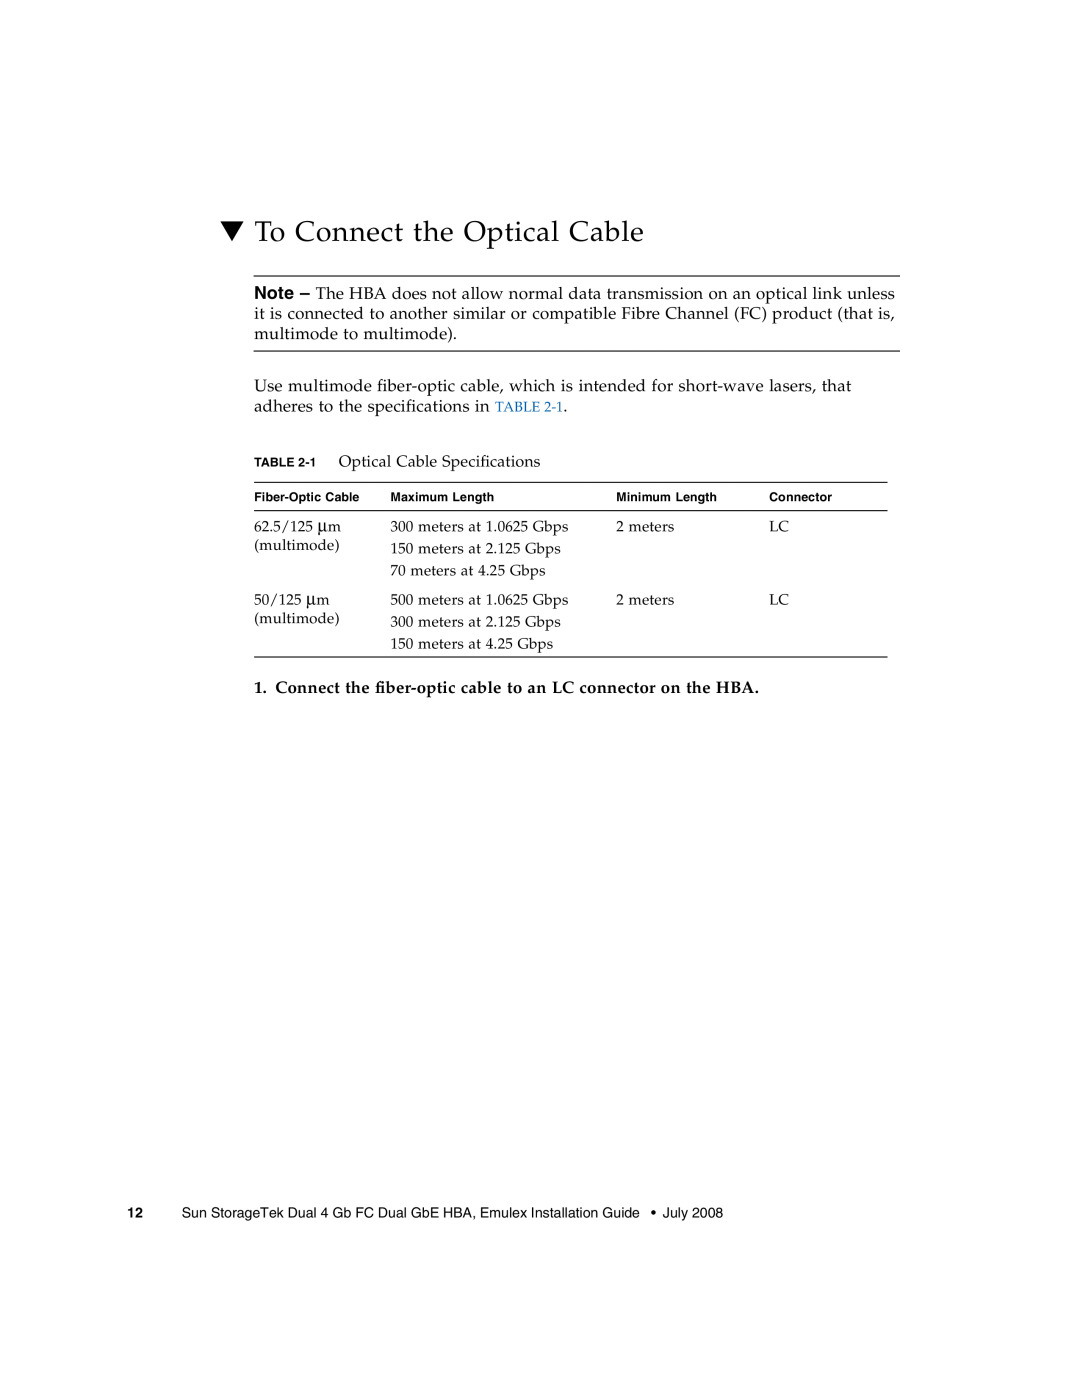 Sun Microsystems SG-XPCIE2FCGBE-E-Z manual To Connect the Optical Cable 